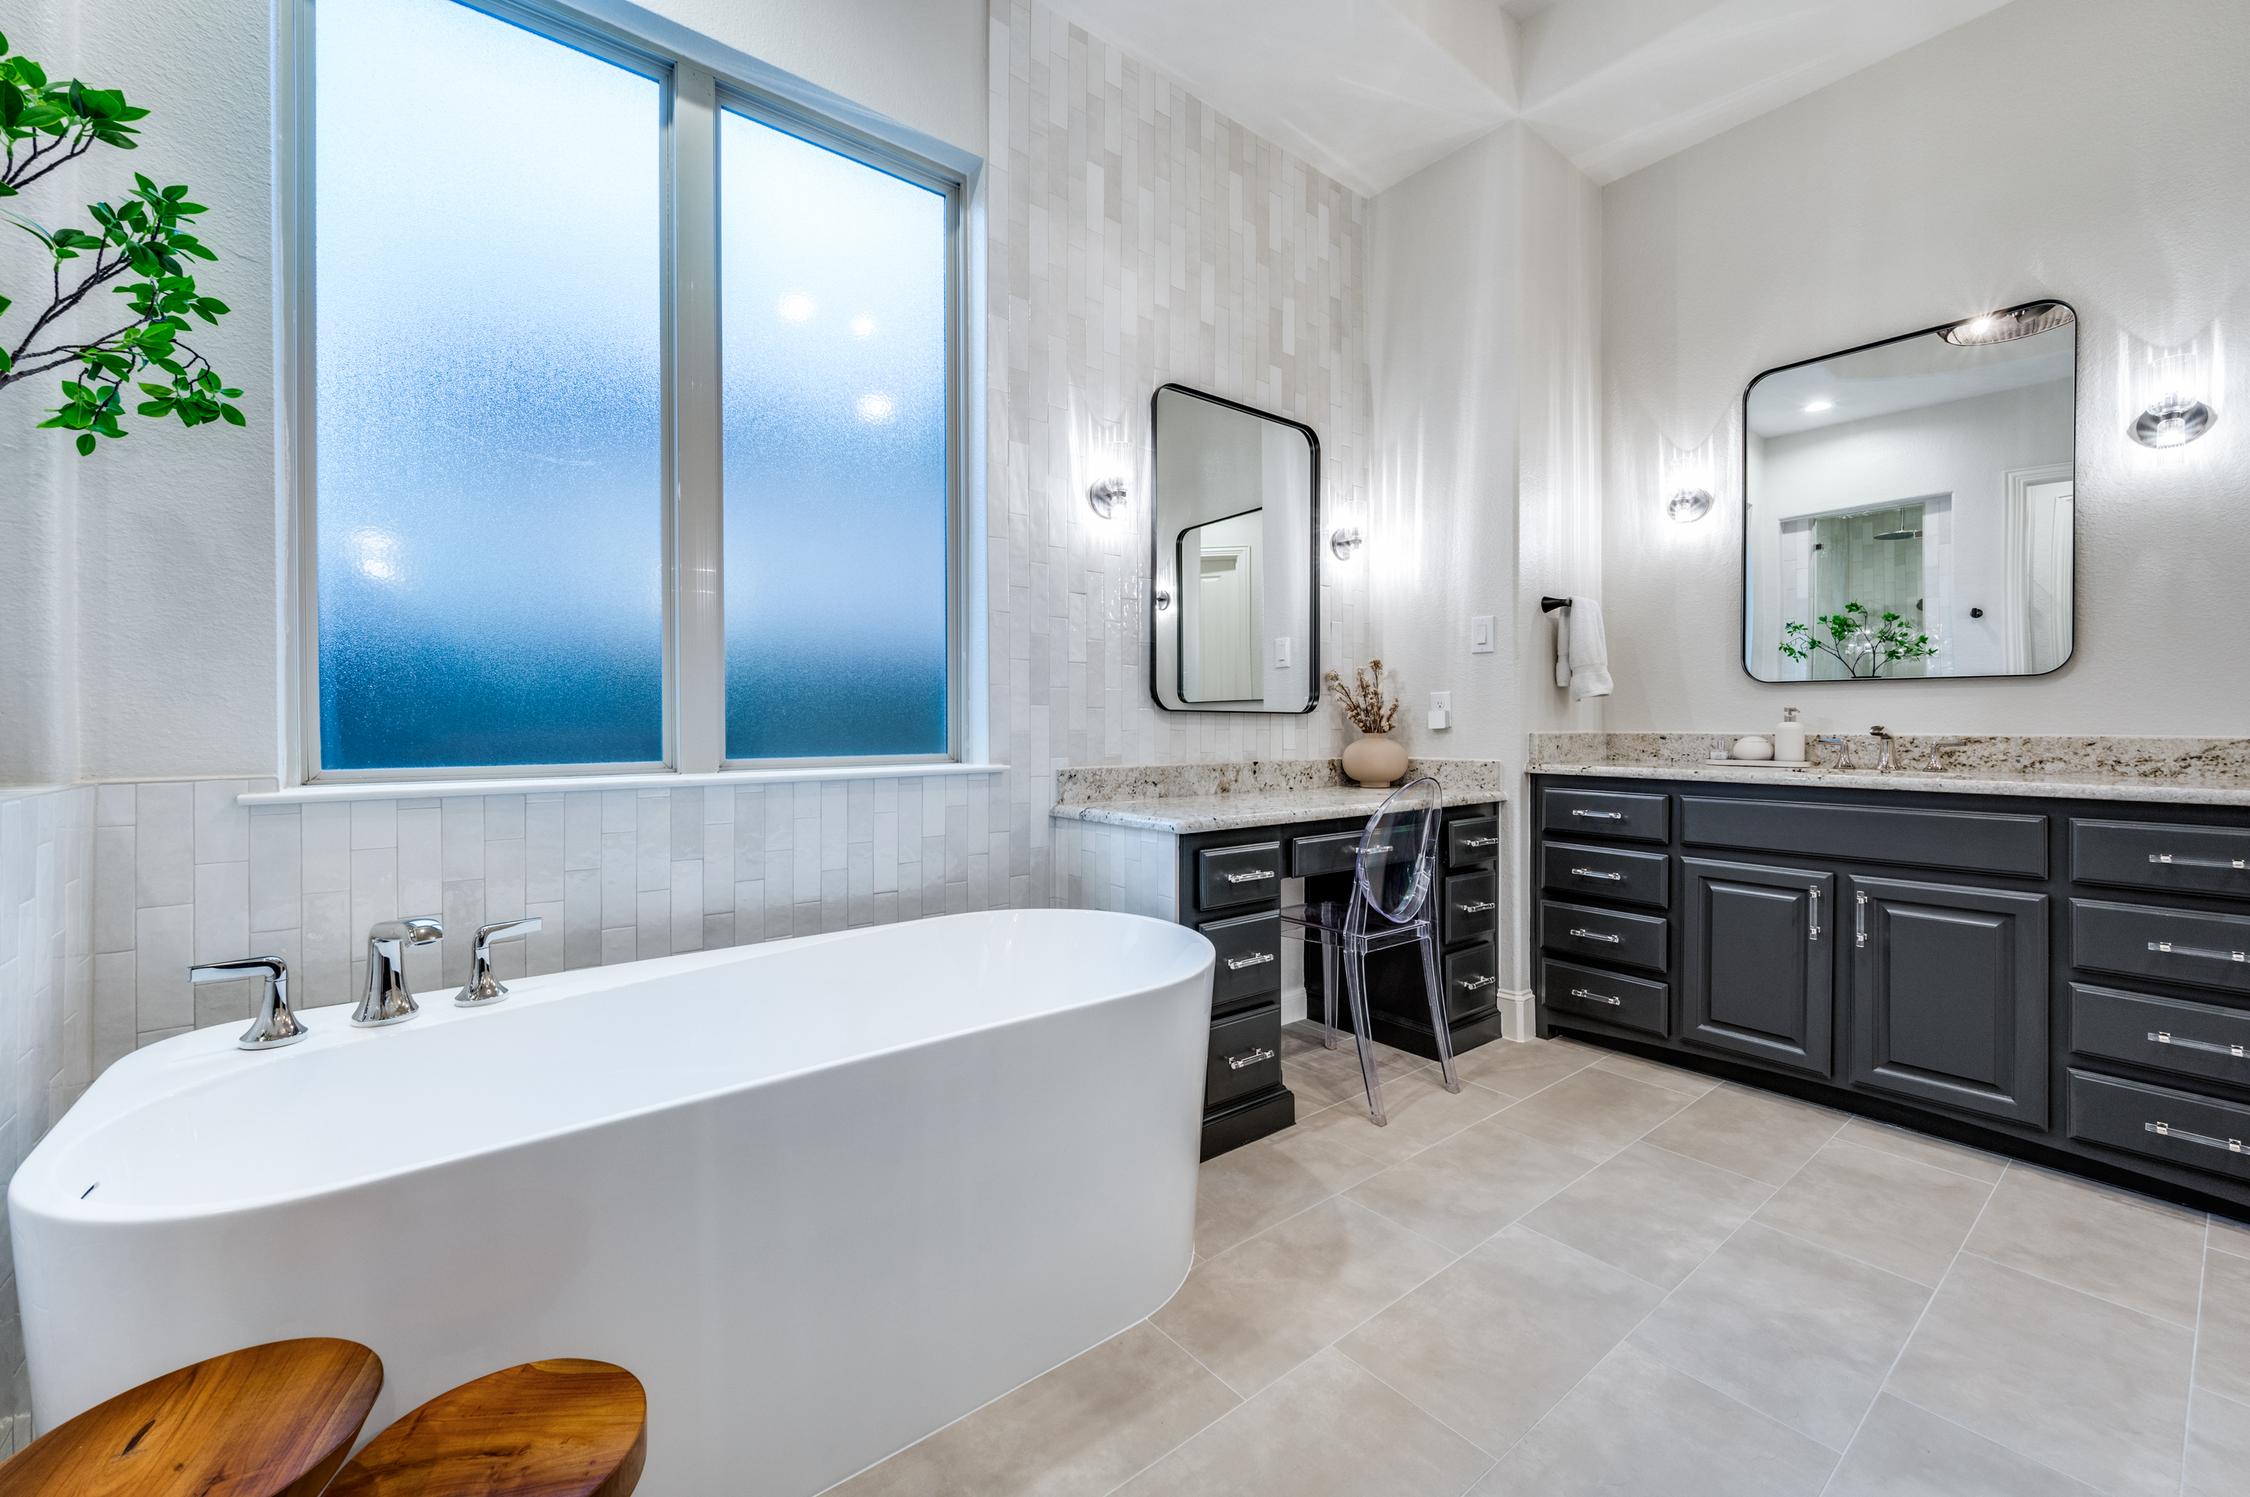 Featured image for “Modern Bathroom Remodel in Frisco, Texas”